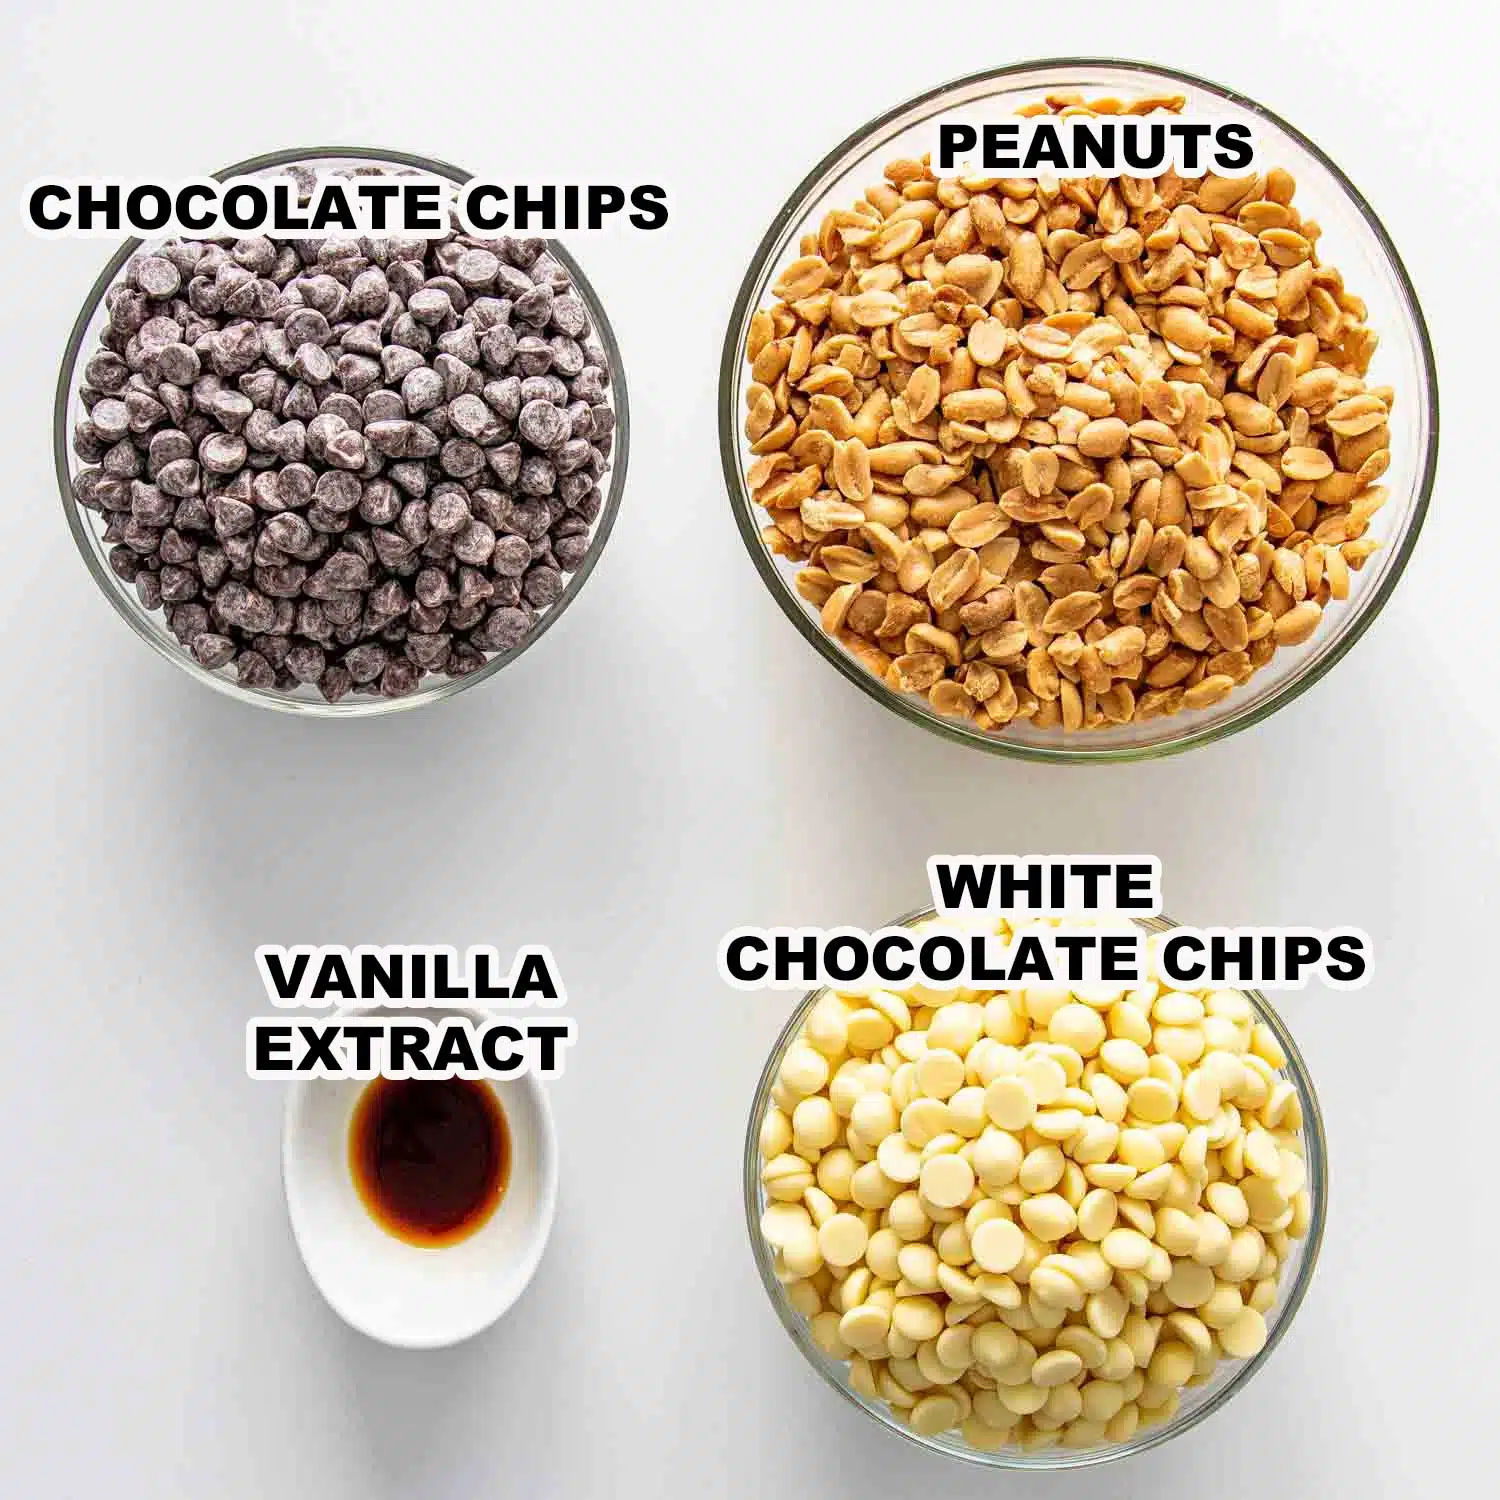 ingredients needed to make slow cooker chocolate candy.